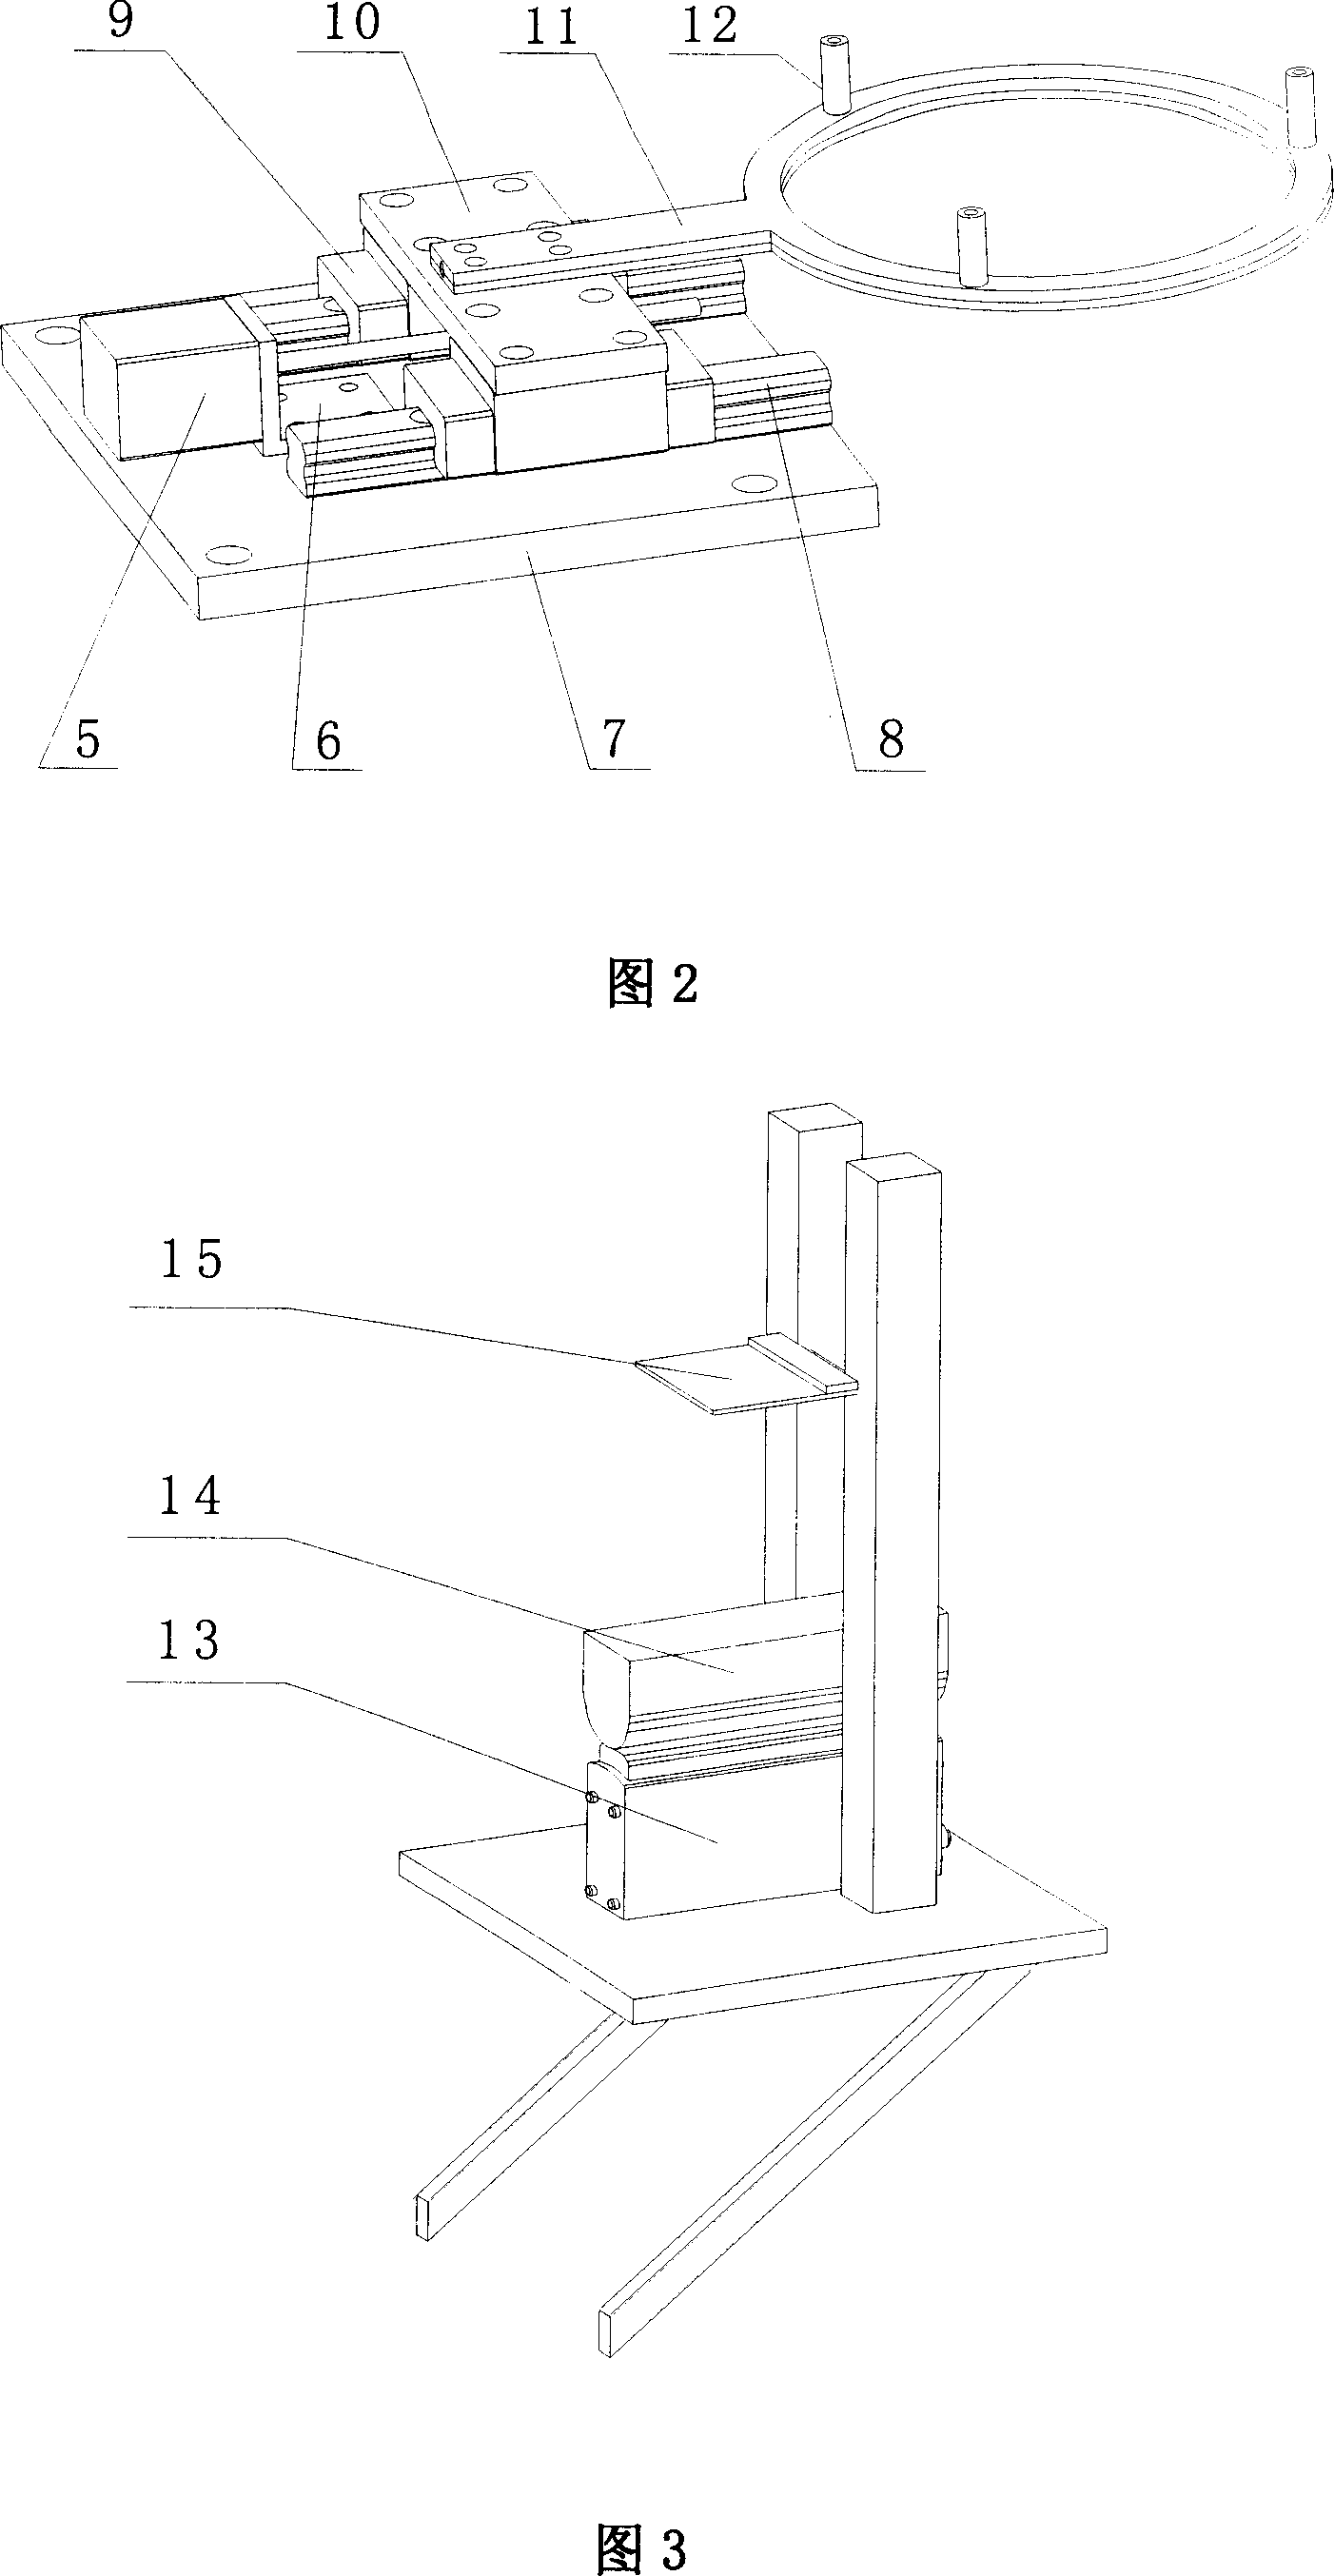 Silicon wafer prealigning device